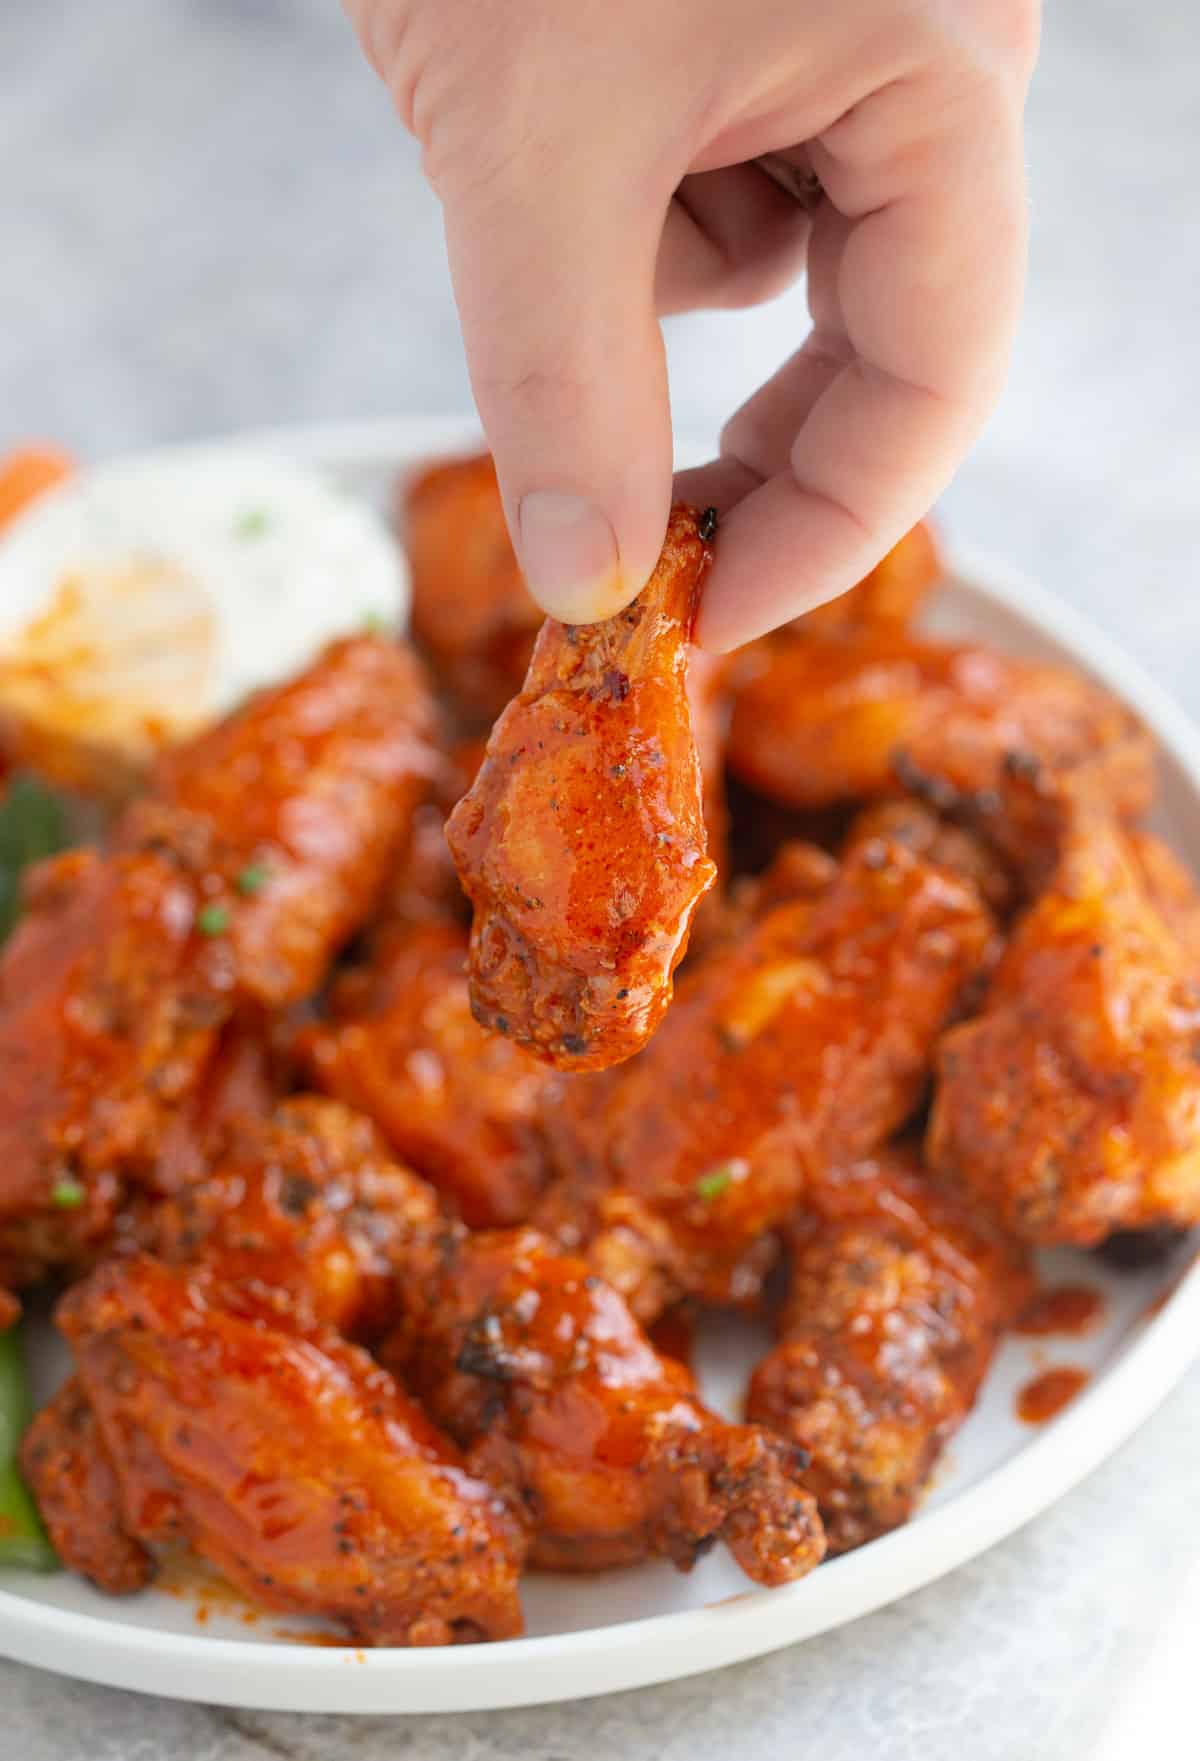 A hand grabbing a grilled Buffalo style chicken wing